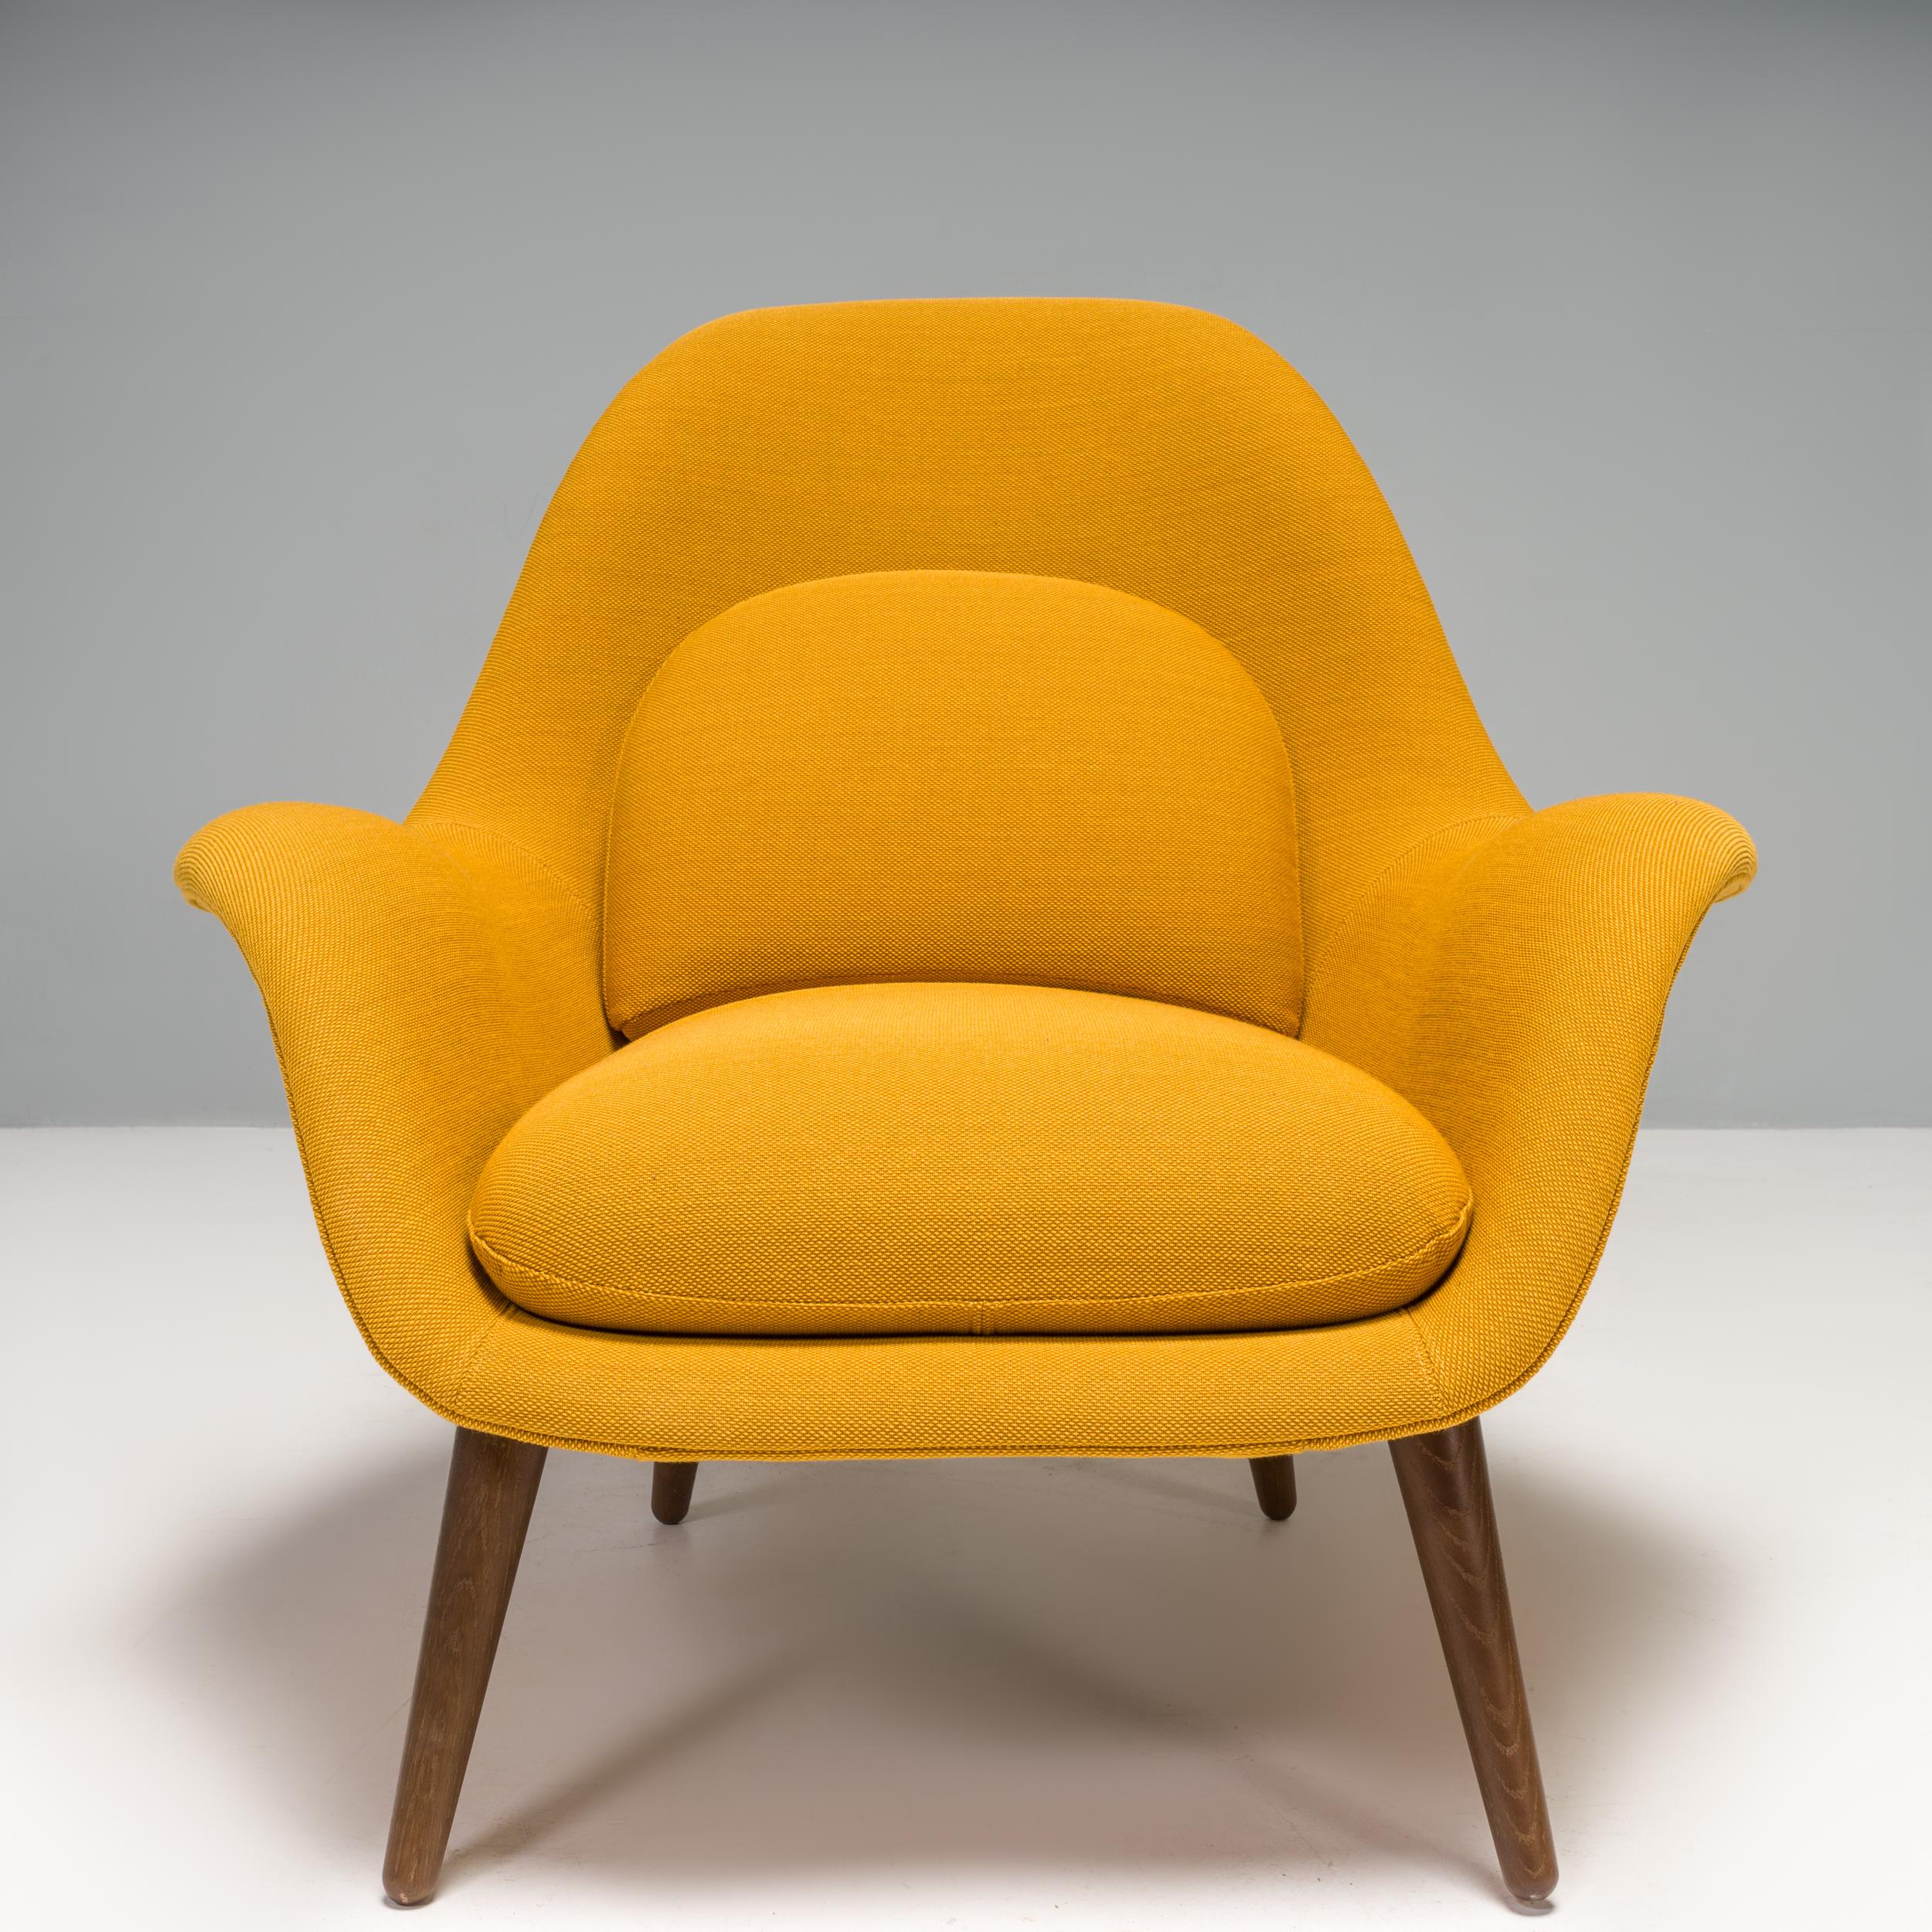 Danish Fredericia by Space Copenhagen Mustard Yellow Fabric Swoon Lounge Armchair, 2021 For Sale